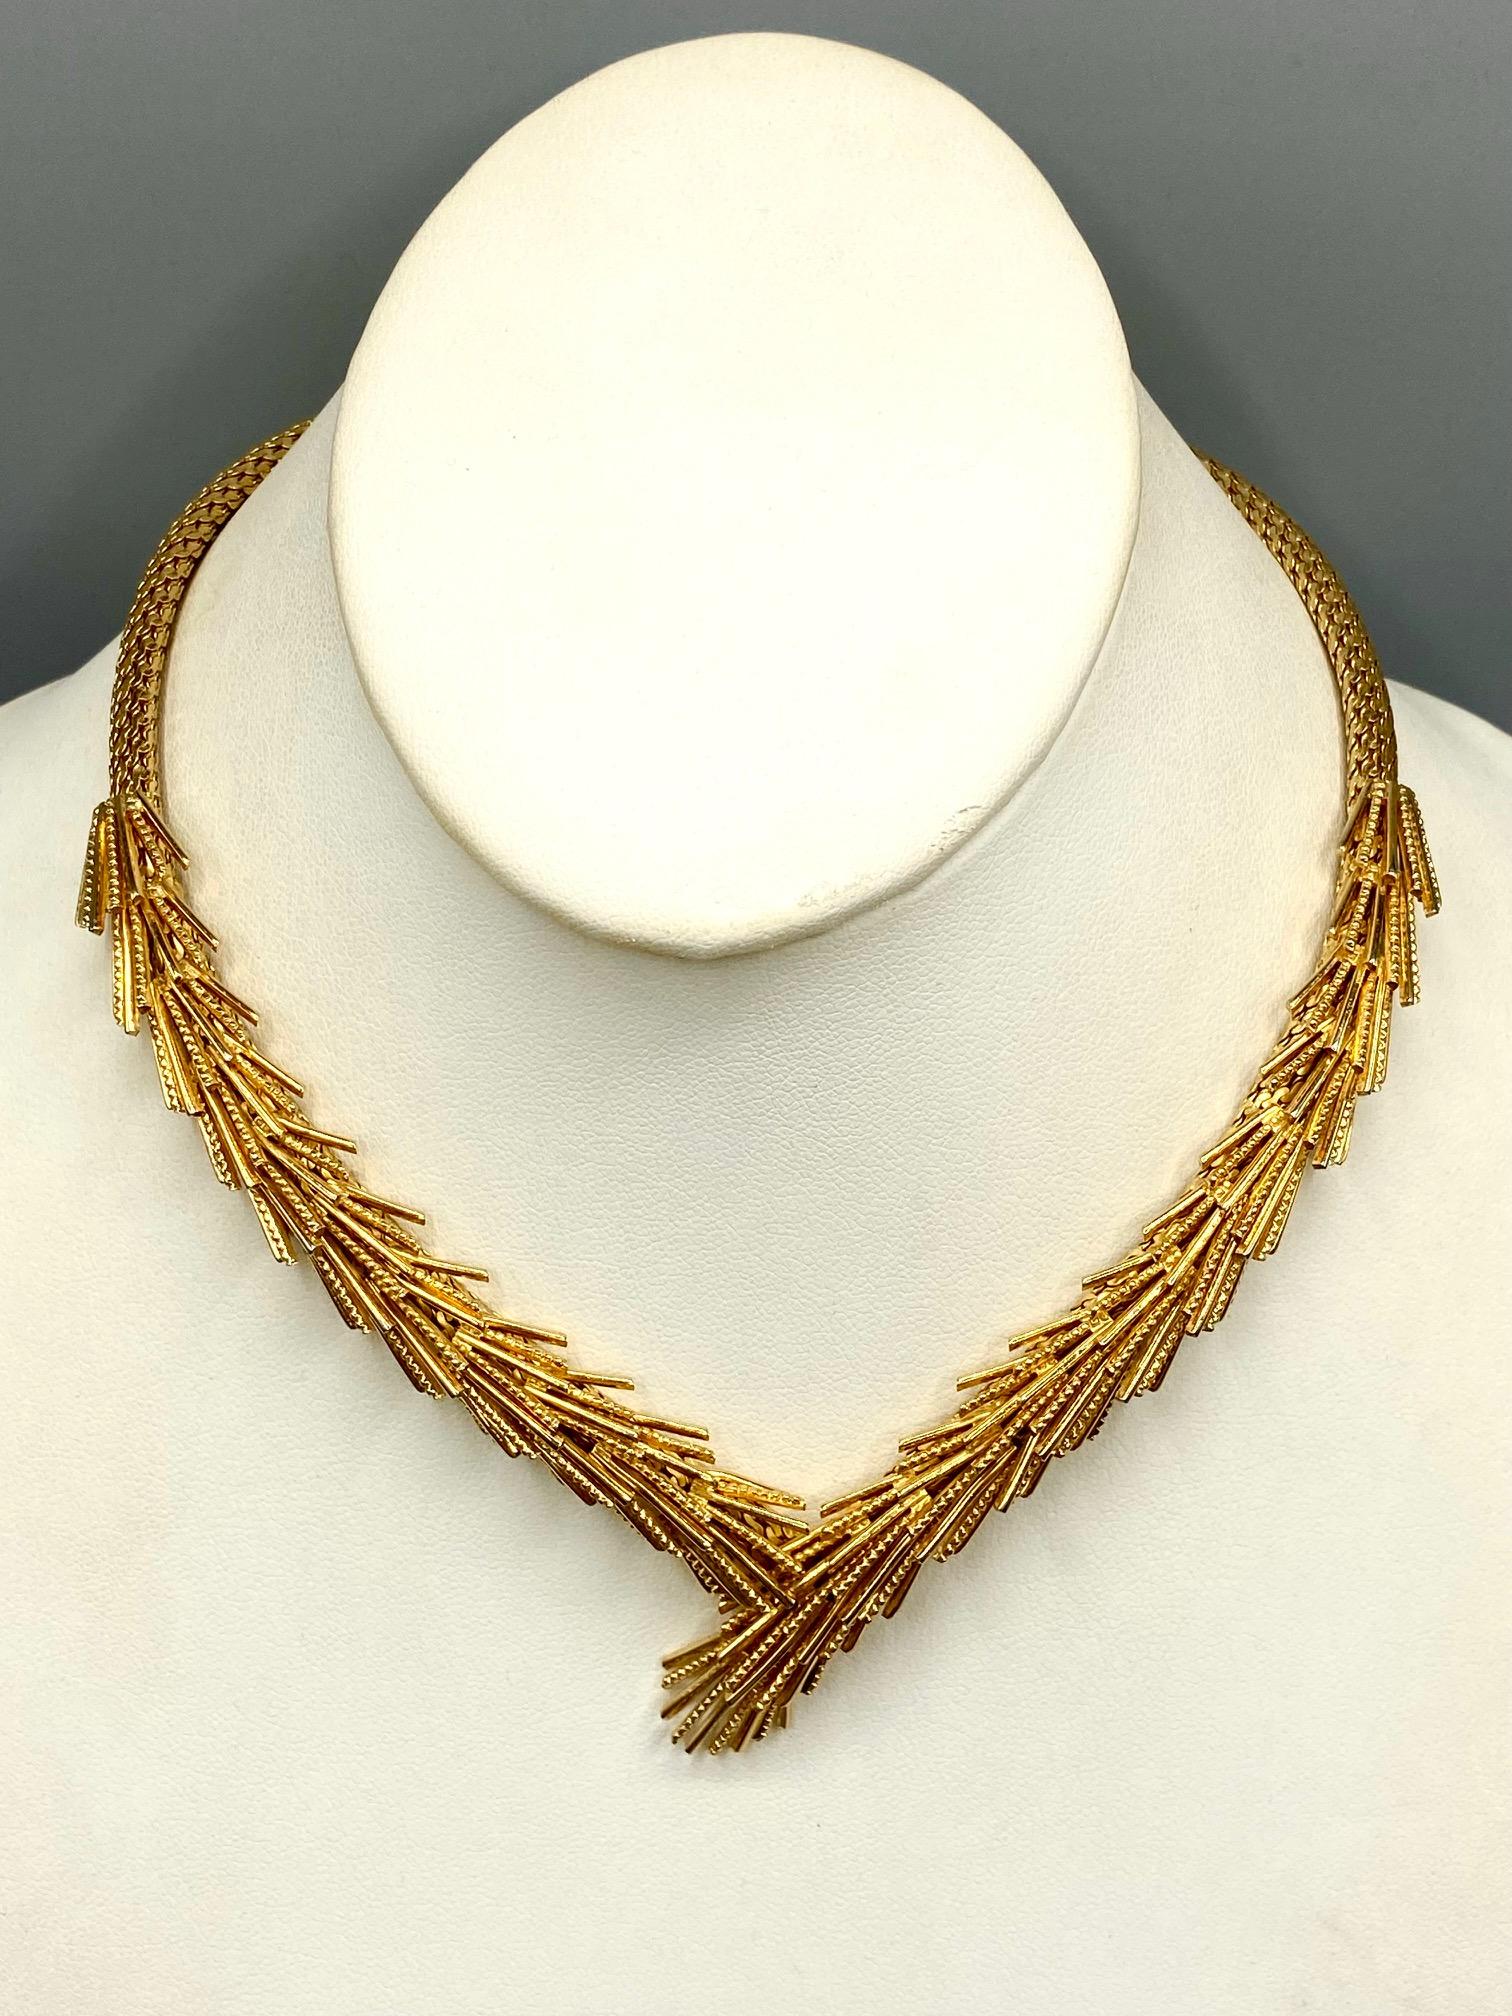 Abstract link cross over necklace by well known German fashion jewelry company Henkel & Grosse. The front half of  the gold tone necklace has an overlapping fringe or brush design in alternating smooth and textured bars. The back of half is a wide